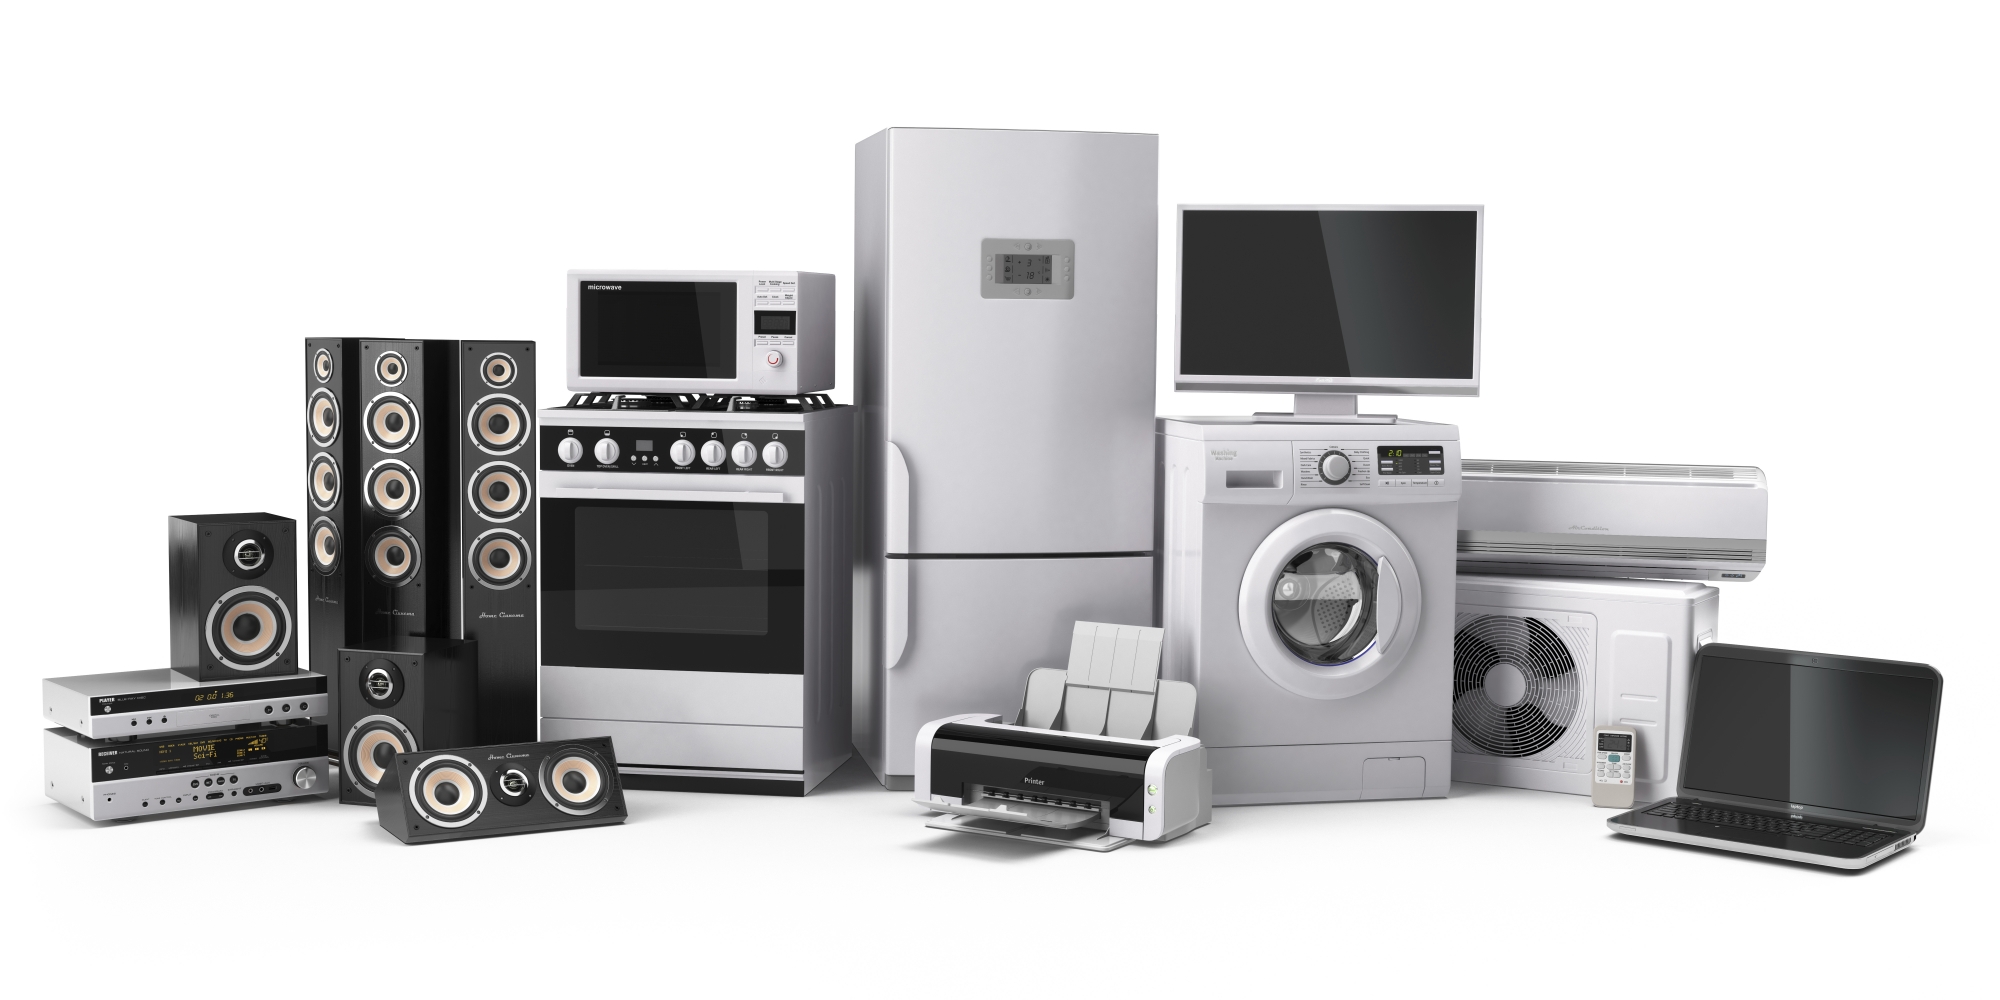 Home Appliance Import Ban Extended Until March 2022 | Financial Tribune